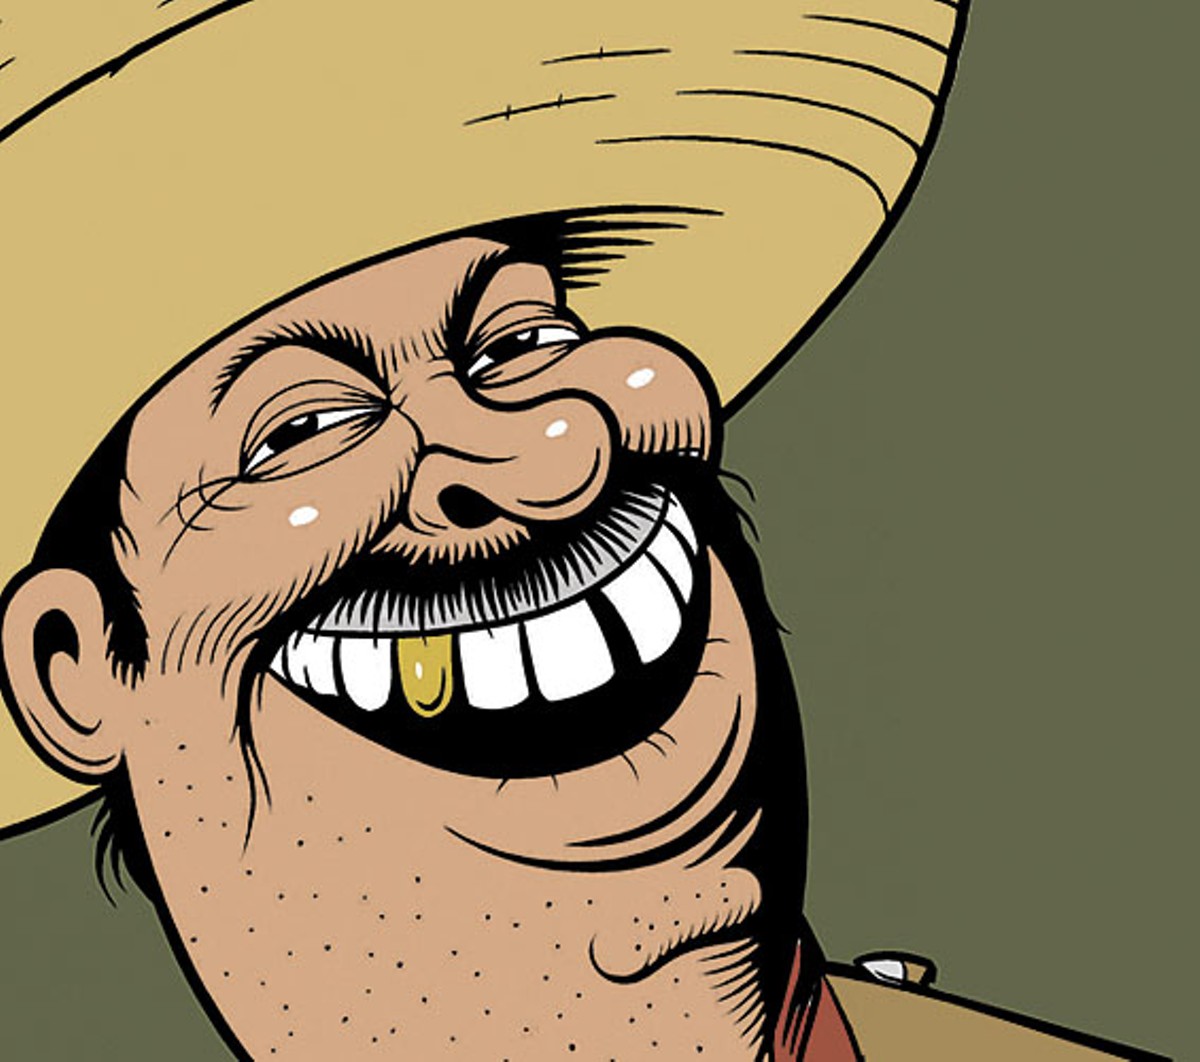 &iexcl;ASK A MEXICAN! Why won't Mexicans speak English even when they can?